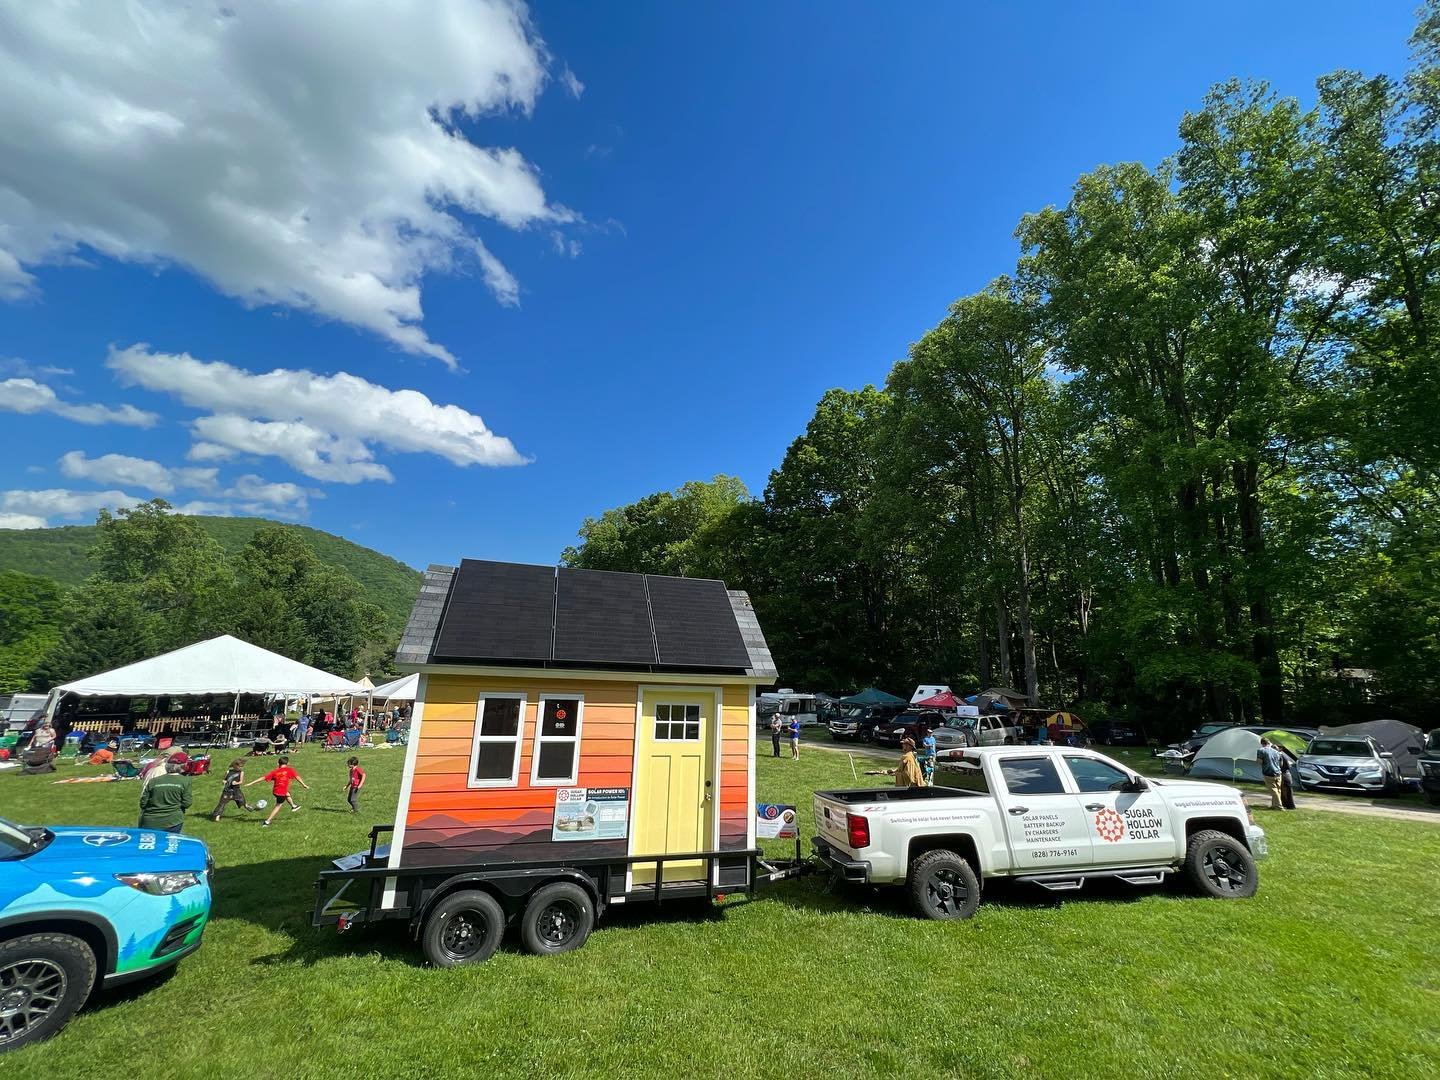 It&rsquo;s a BEAUTIFUL day out At @leafglobalarts Retreat. Stop by and check out our Sugar Hollow Power House. We&rsquo;ve got energy to share!